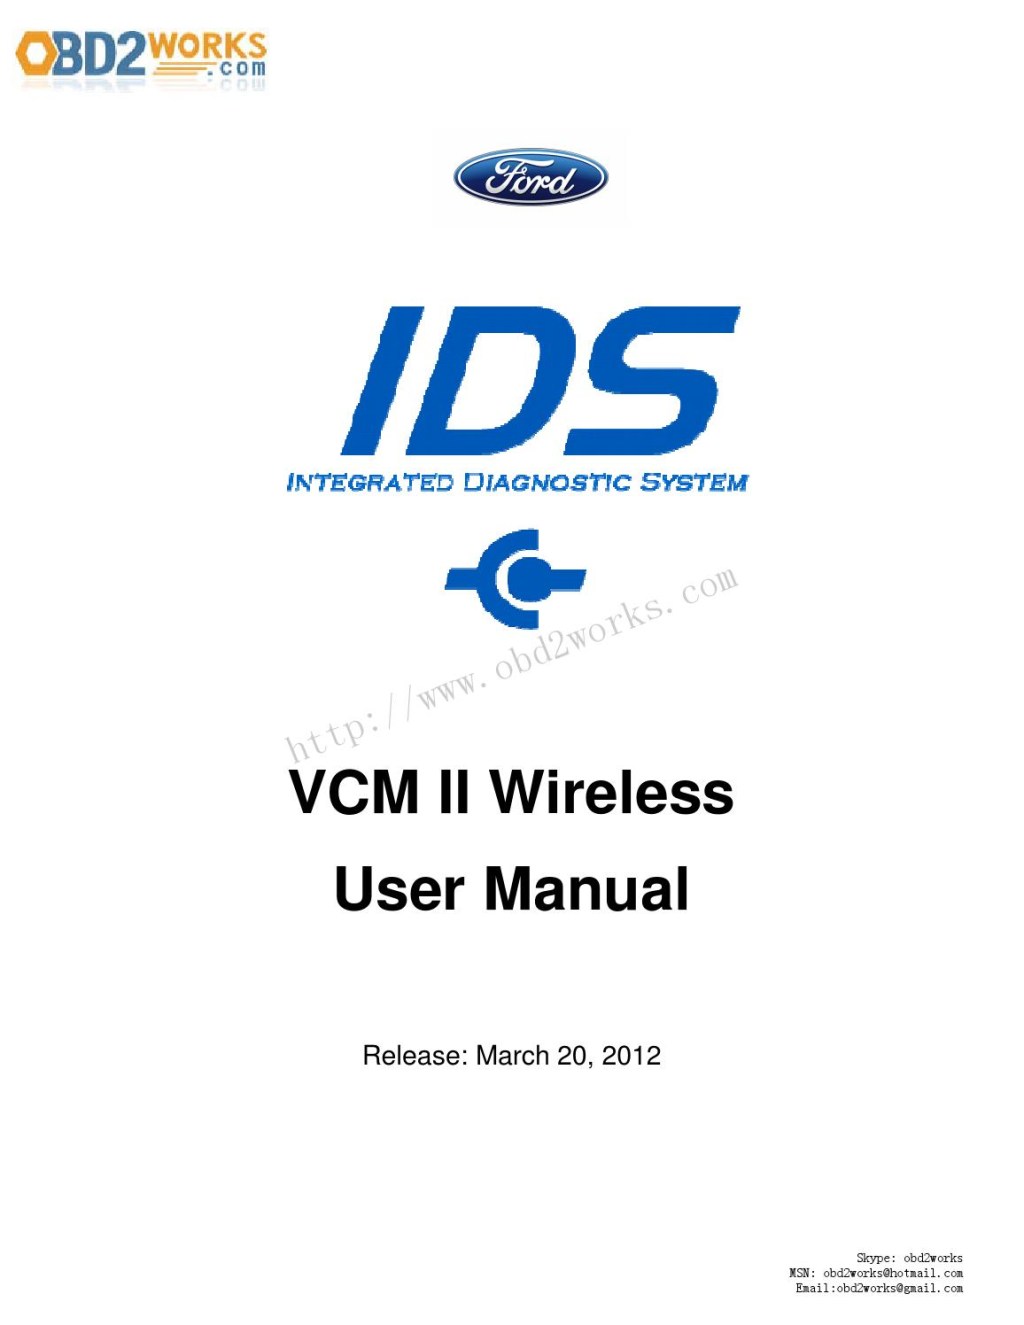 Picture of: Ford VCM II Professional Scanner User manual by obdworks – Issuu